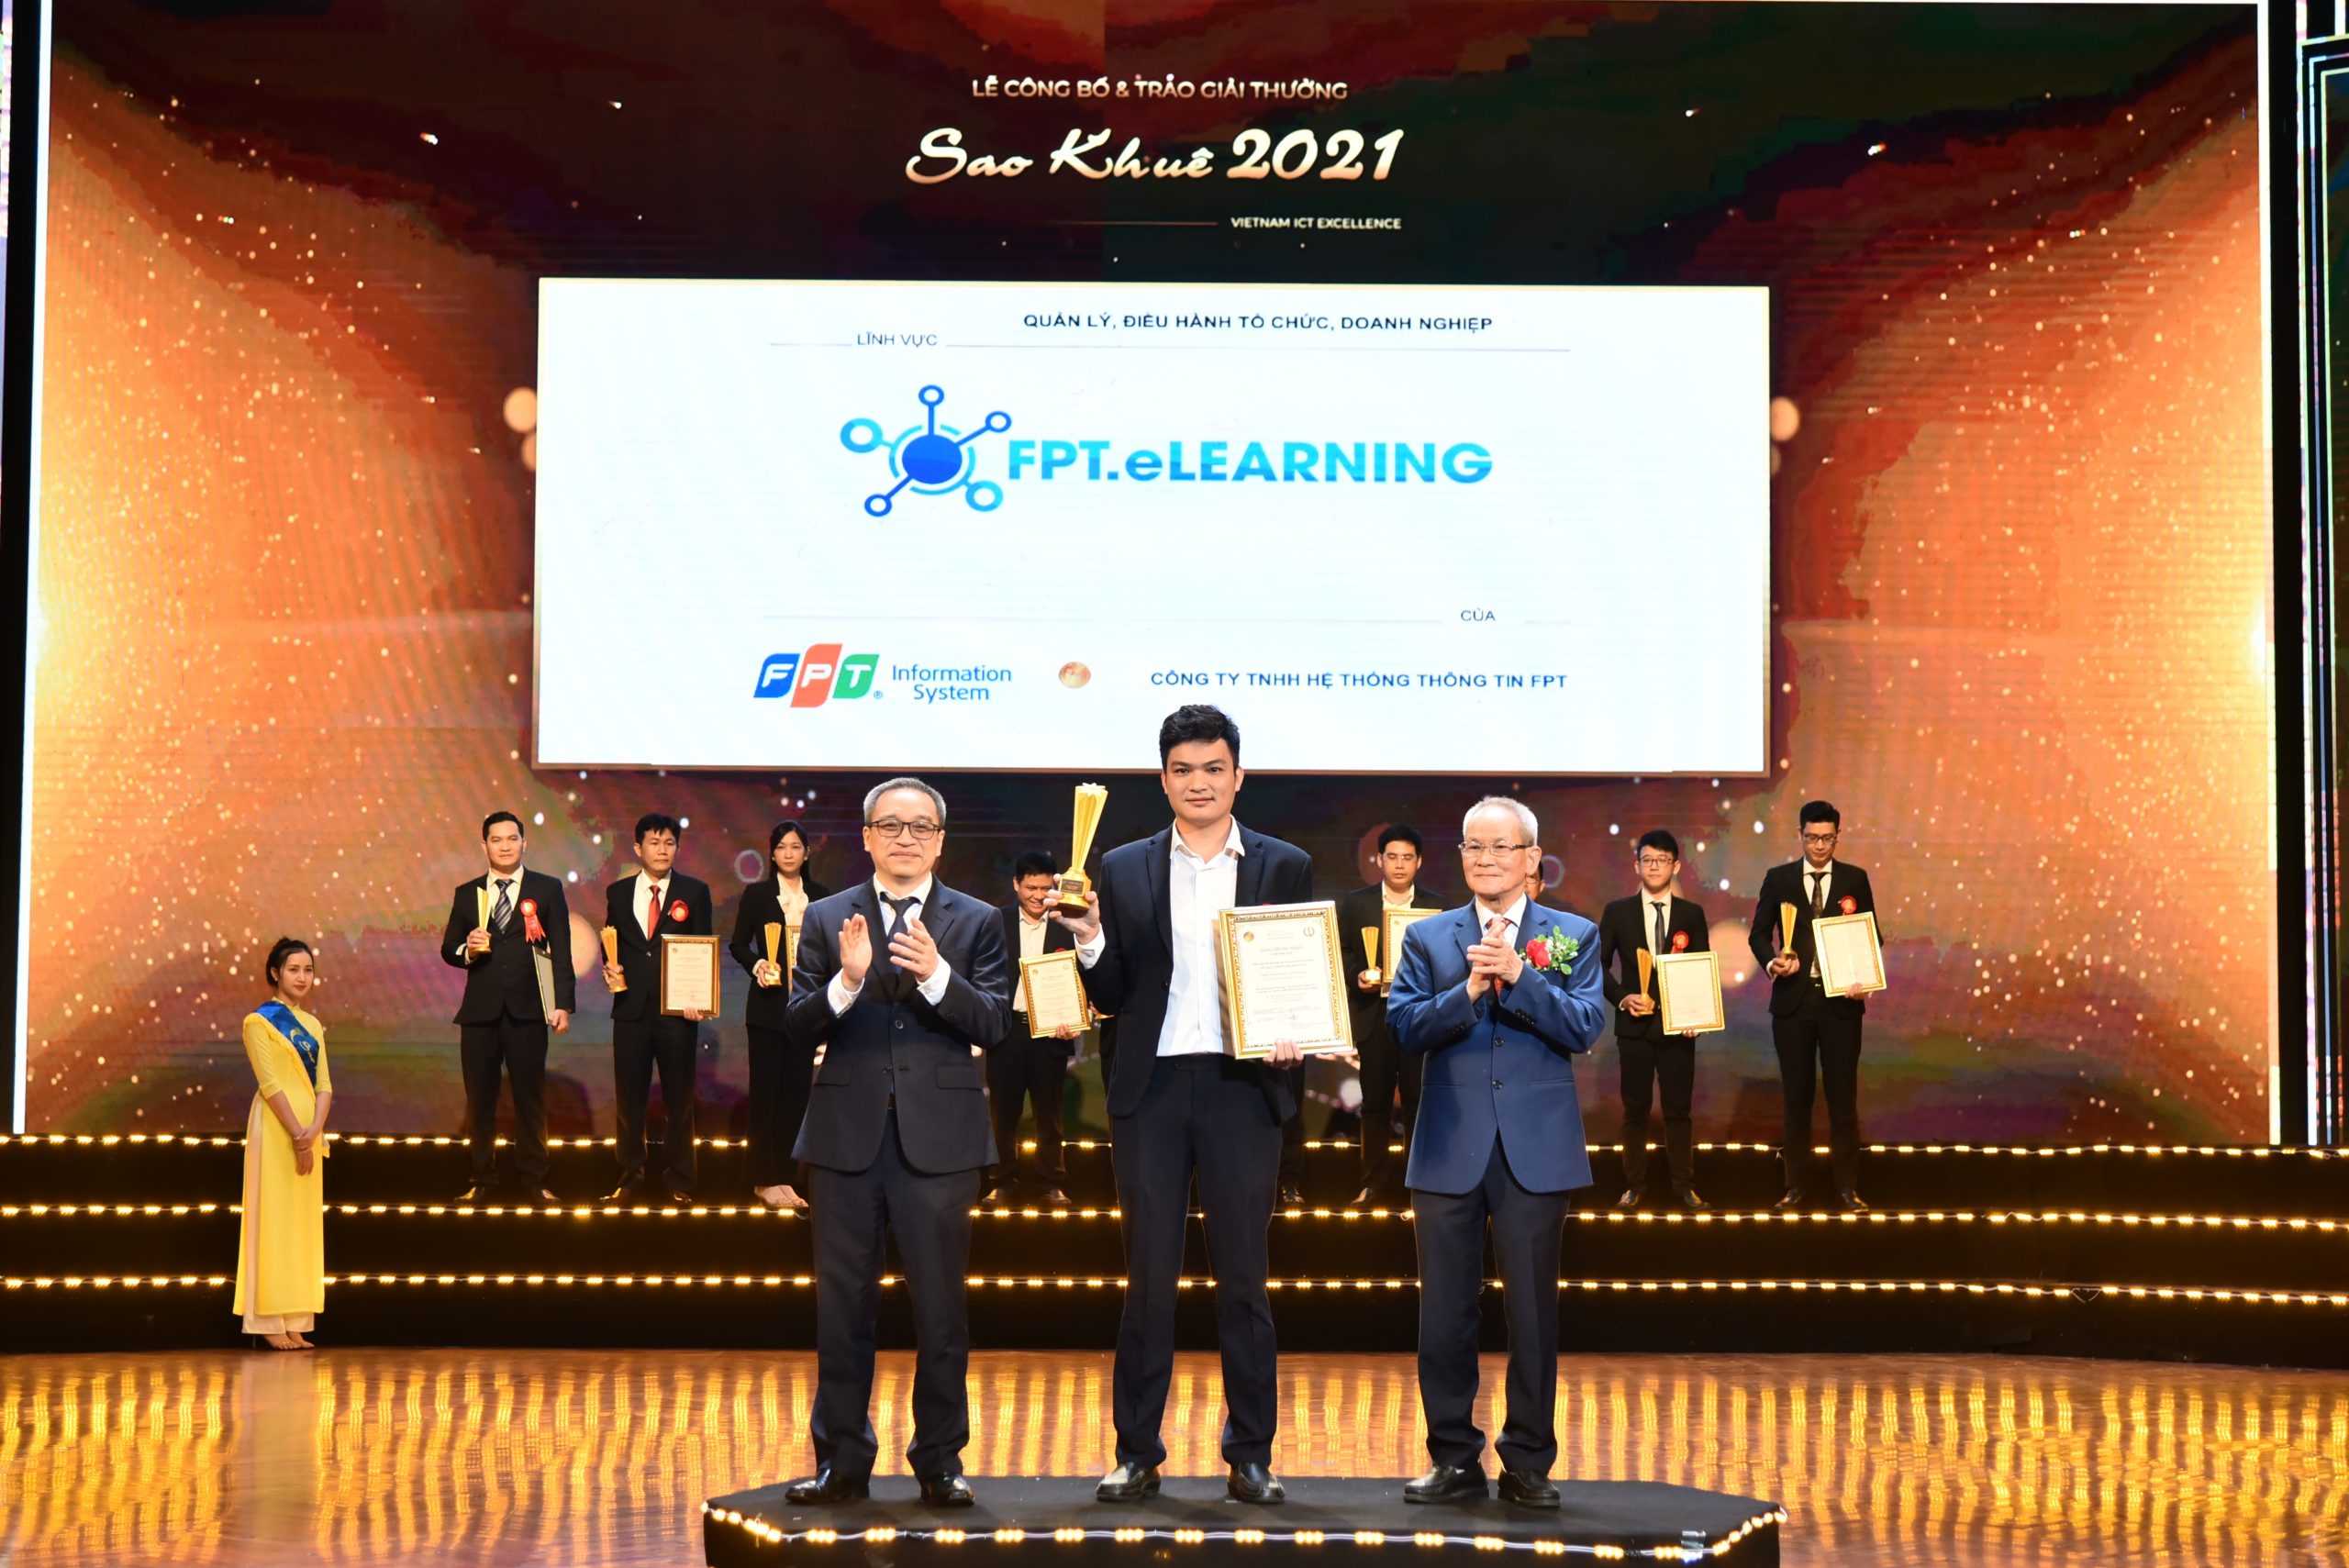 2021 Sao Khue Awards (Vietnam ICT Excellence) – Online Training System (FPT.eLearning)